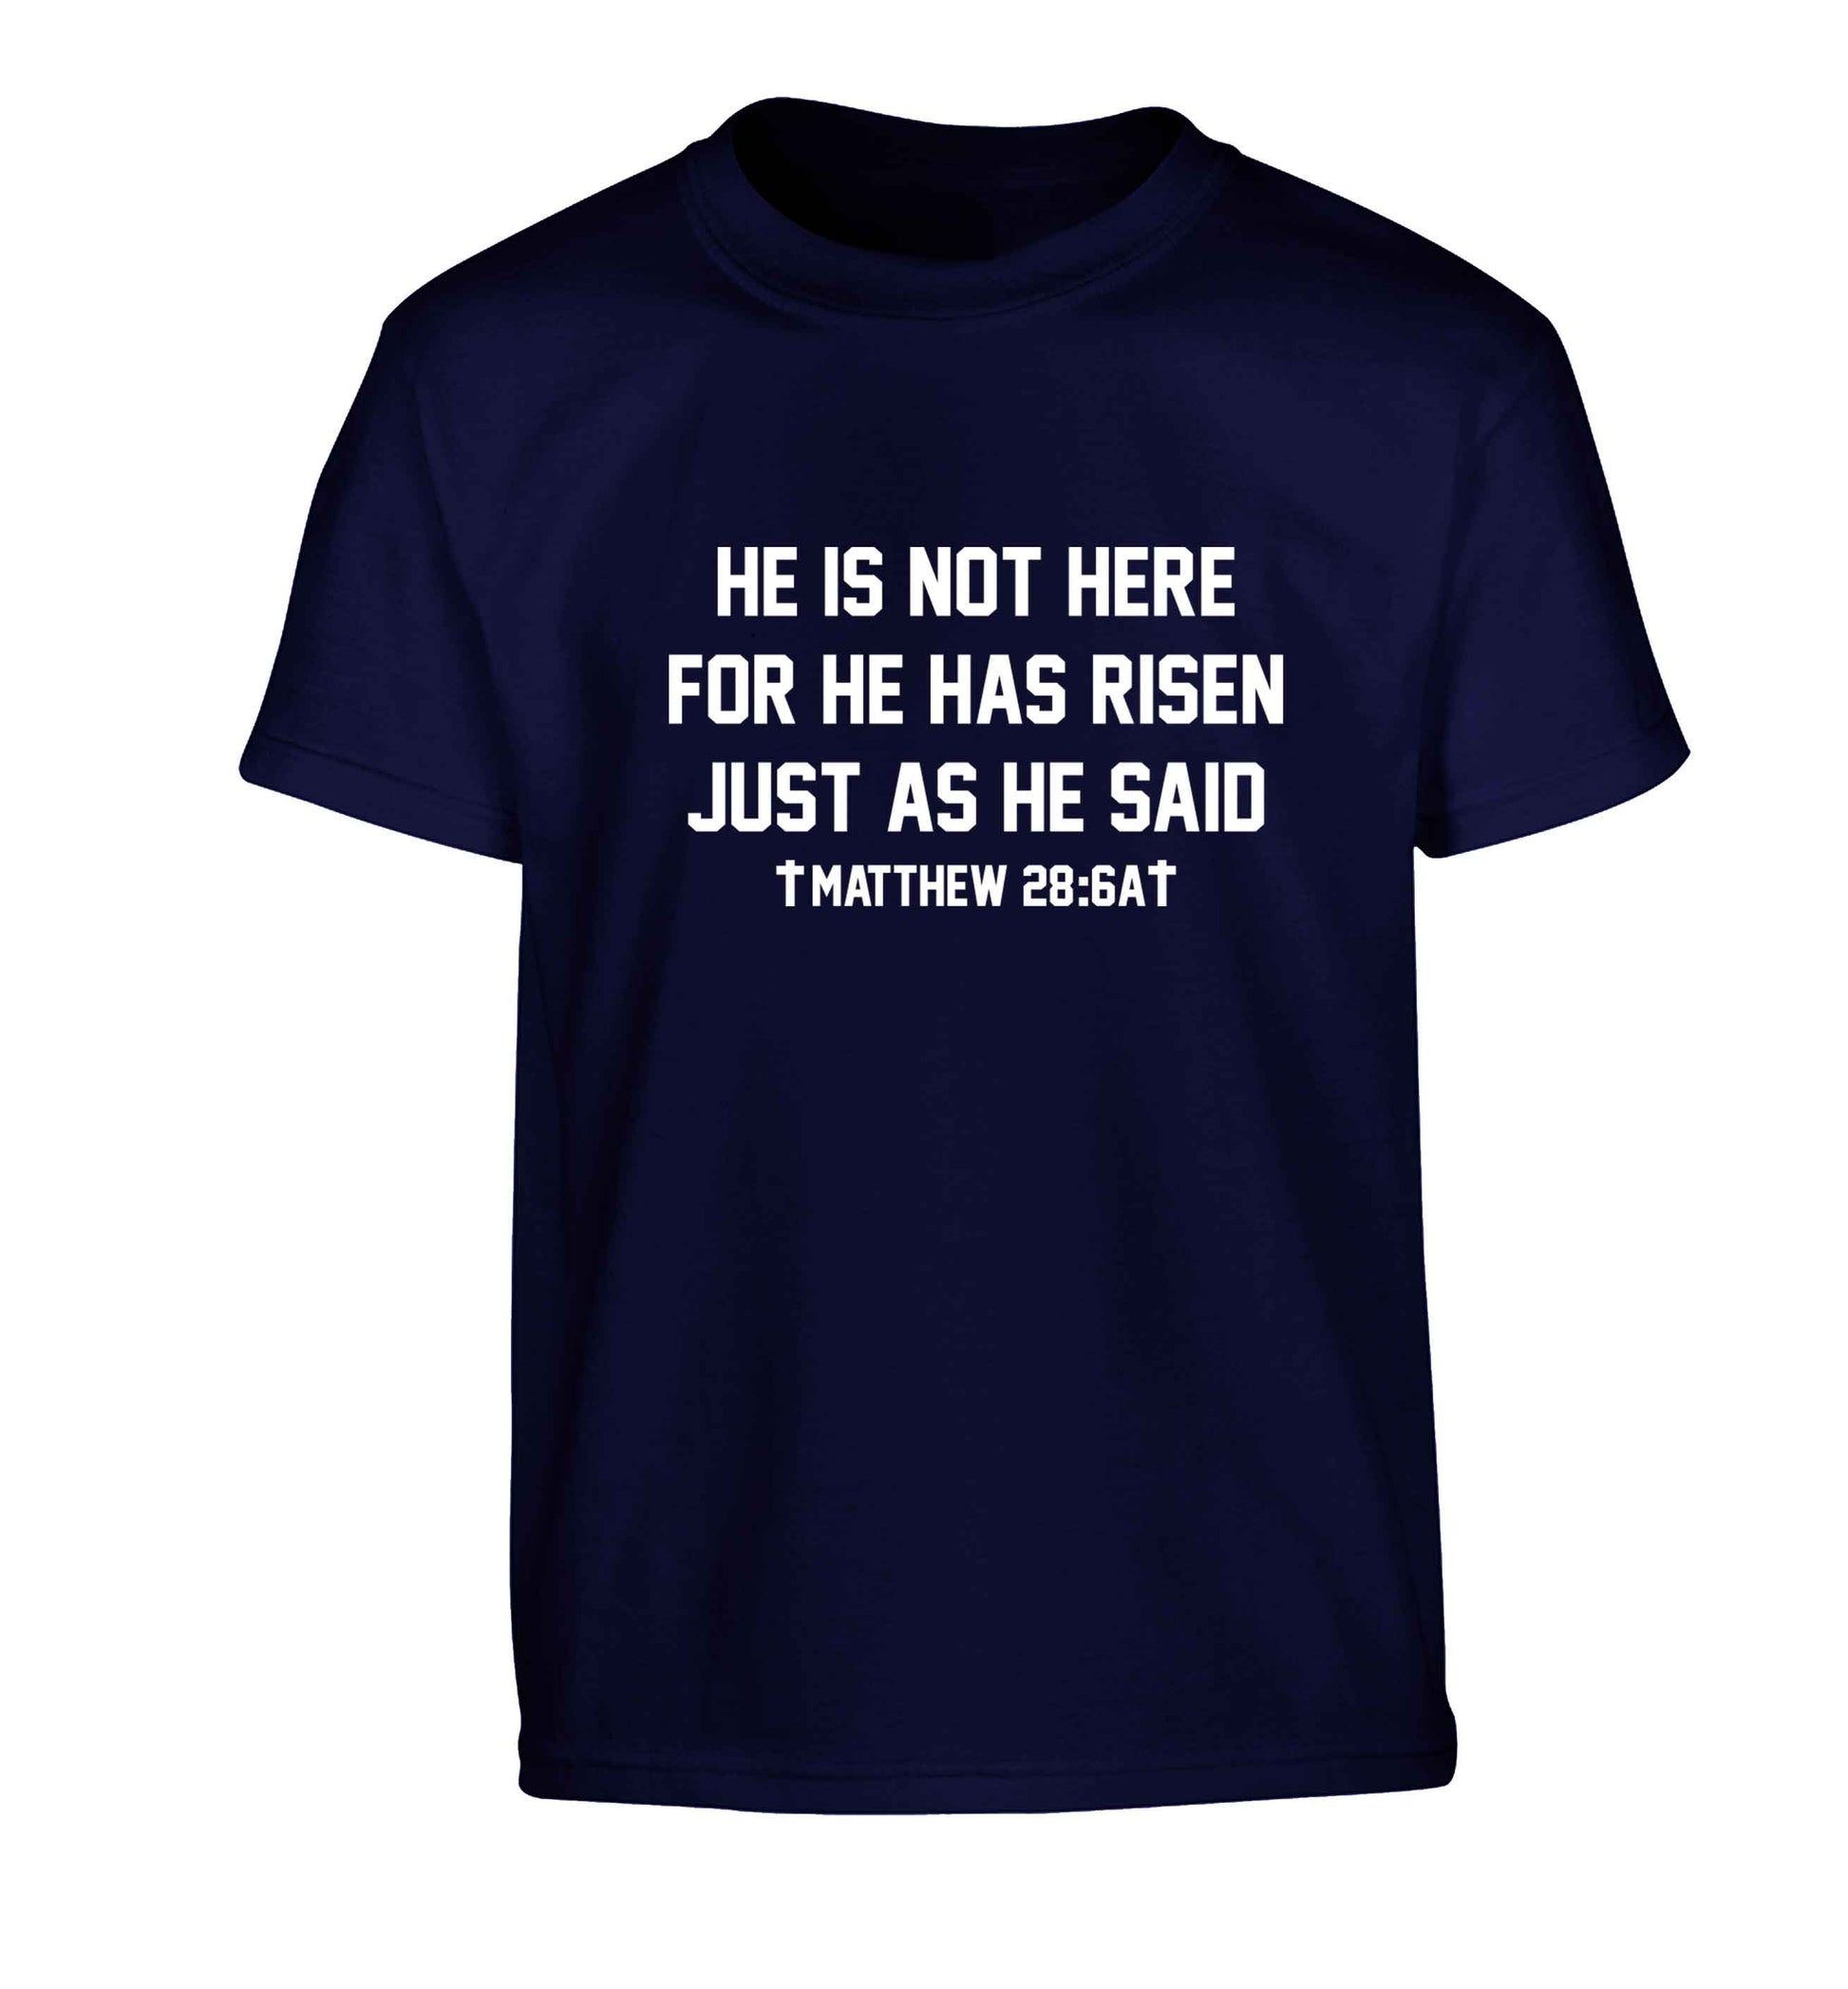 He is not here for he has risen just as he said matthew 28:6A Children's navy Tshirt 12-13 Years